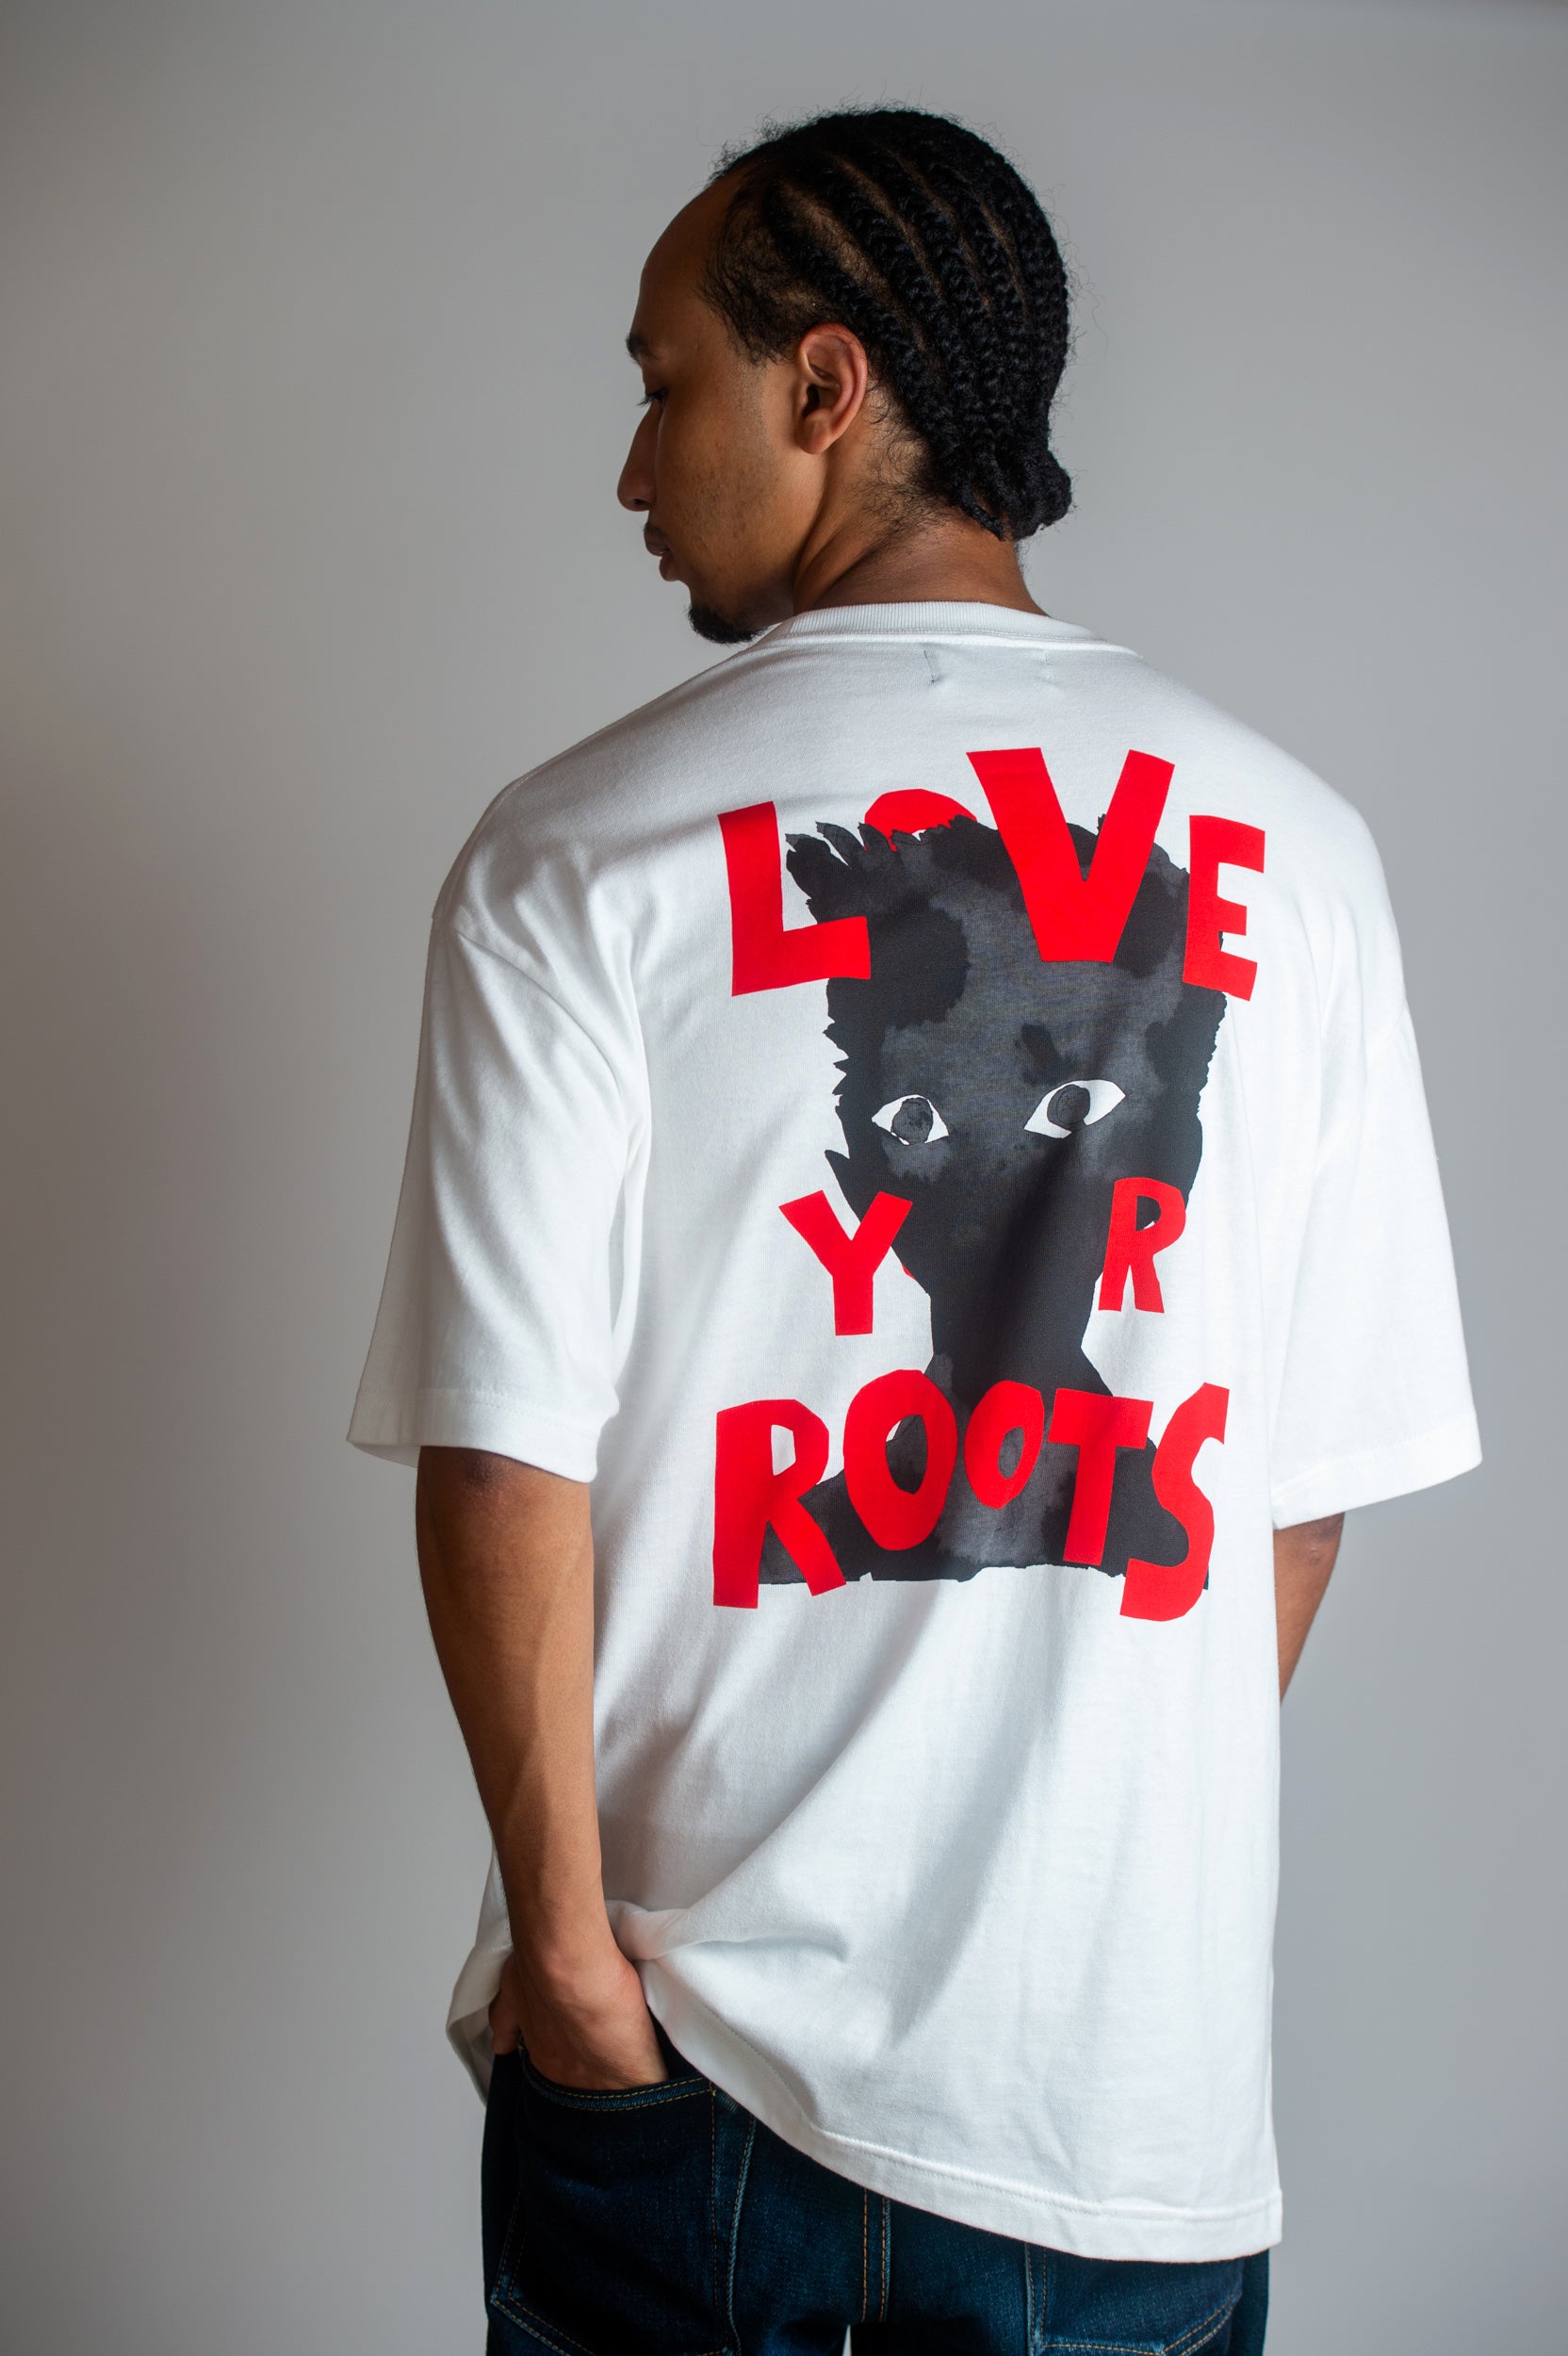 LOVE YOUR ROOTS 2 male model